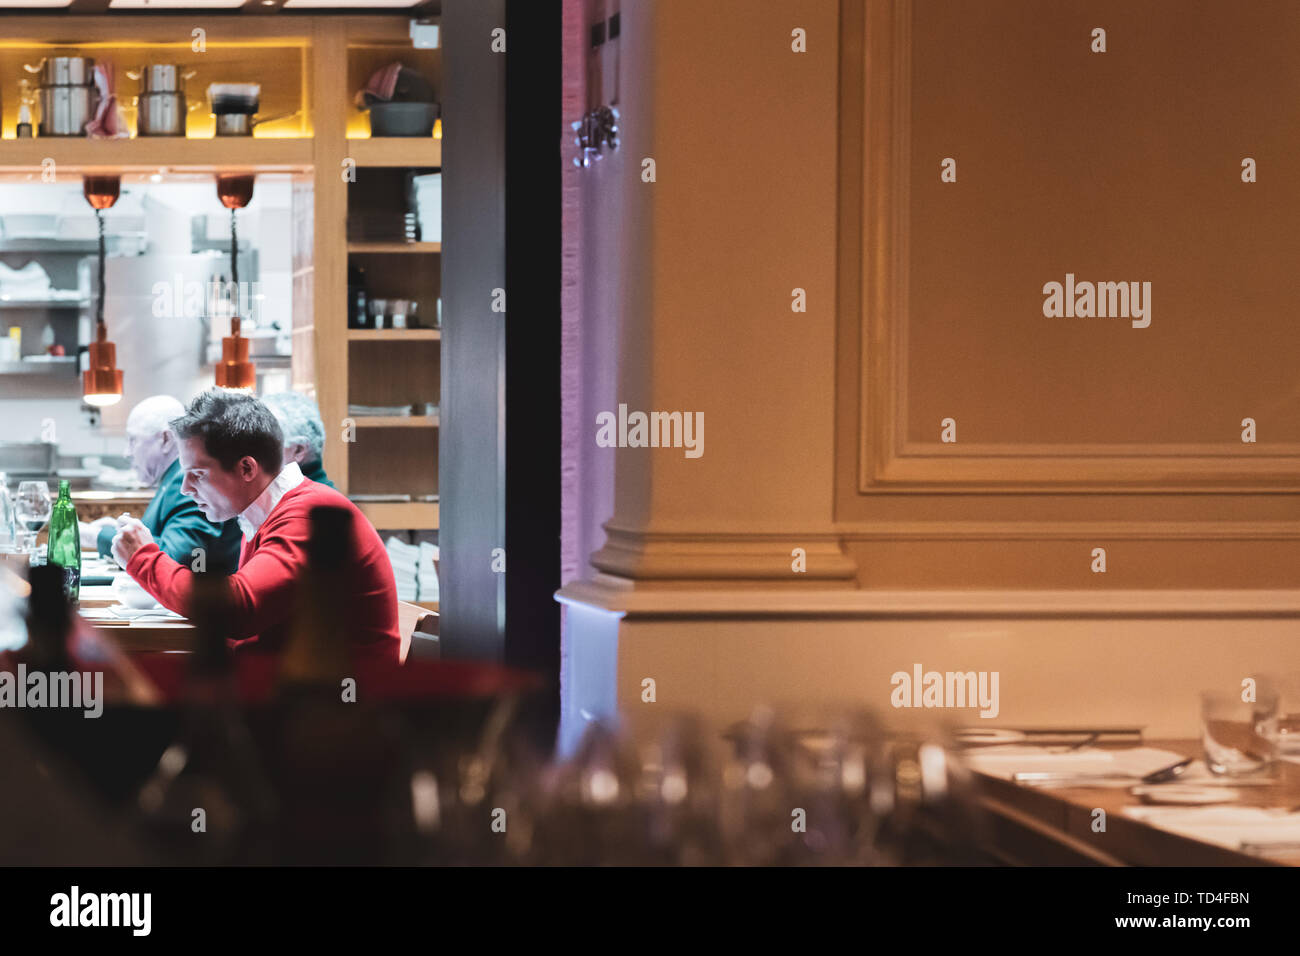 PRAGUE, CZECH - 12TH APRIL 2019: A man sits inside a restaurant eating in Next Door by Imperial, one of the captials upmarket restaurants Stock Photo